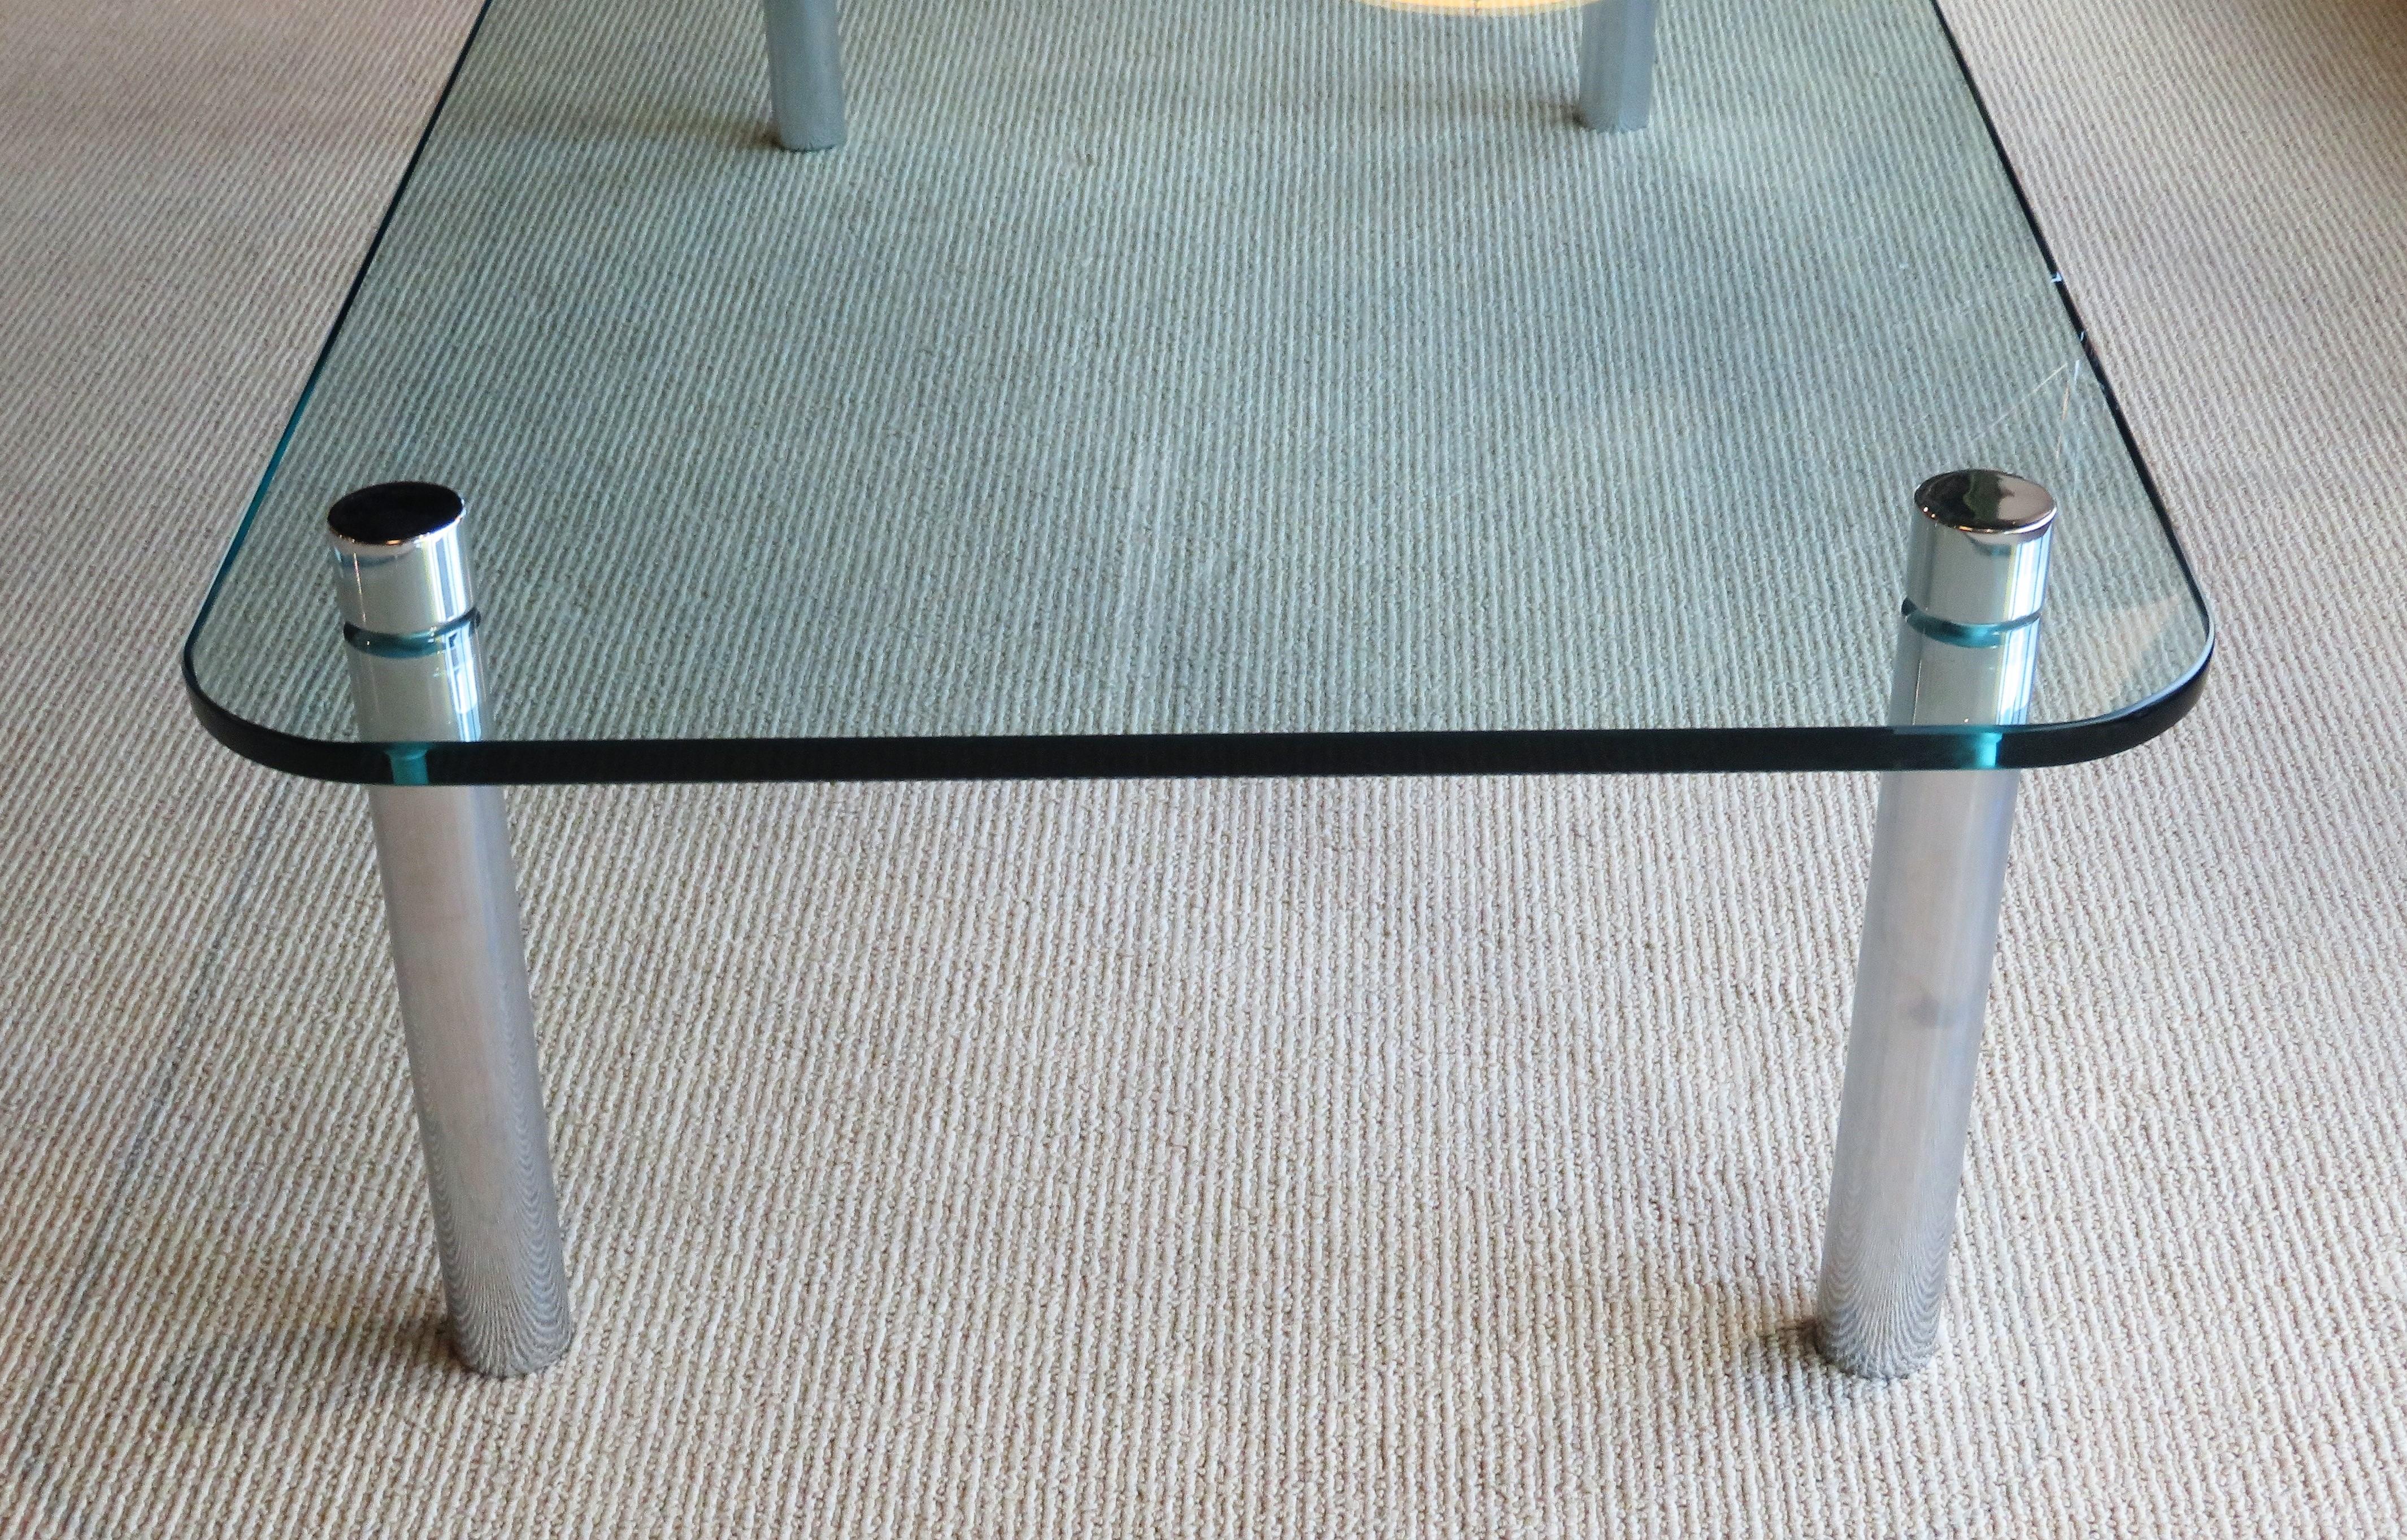 Late 20th Century Pace Style Long Glass & Chrome Modern Coffee Cocktail Table 1970s